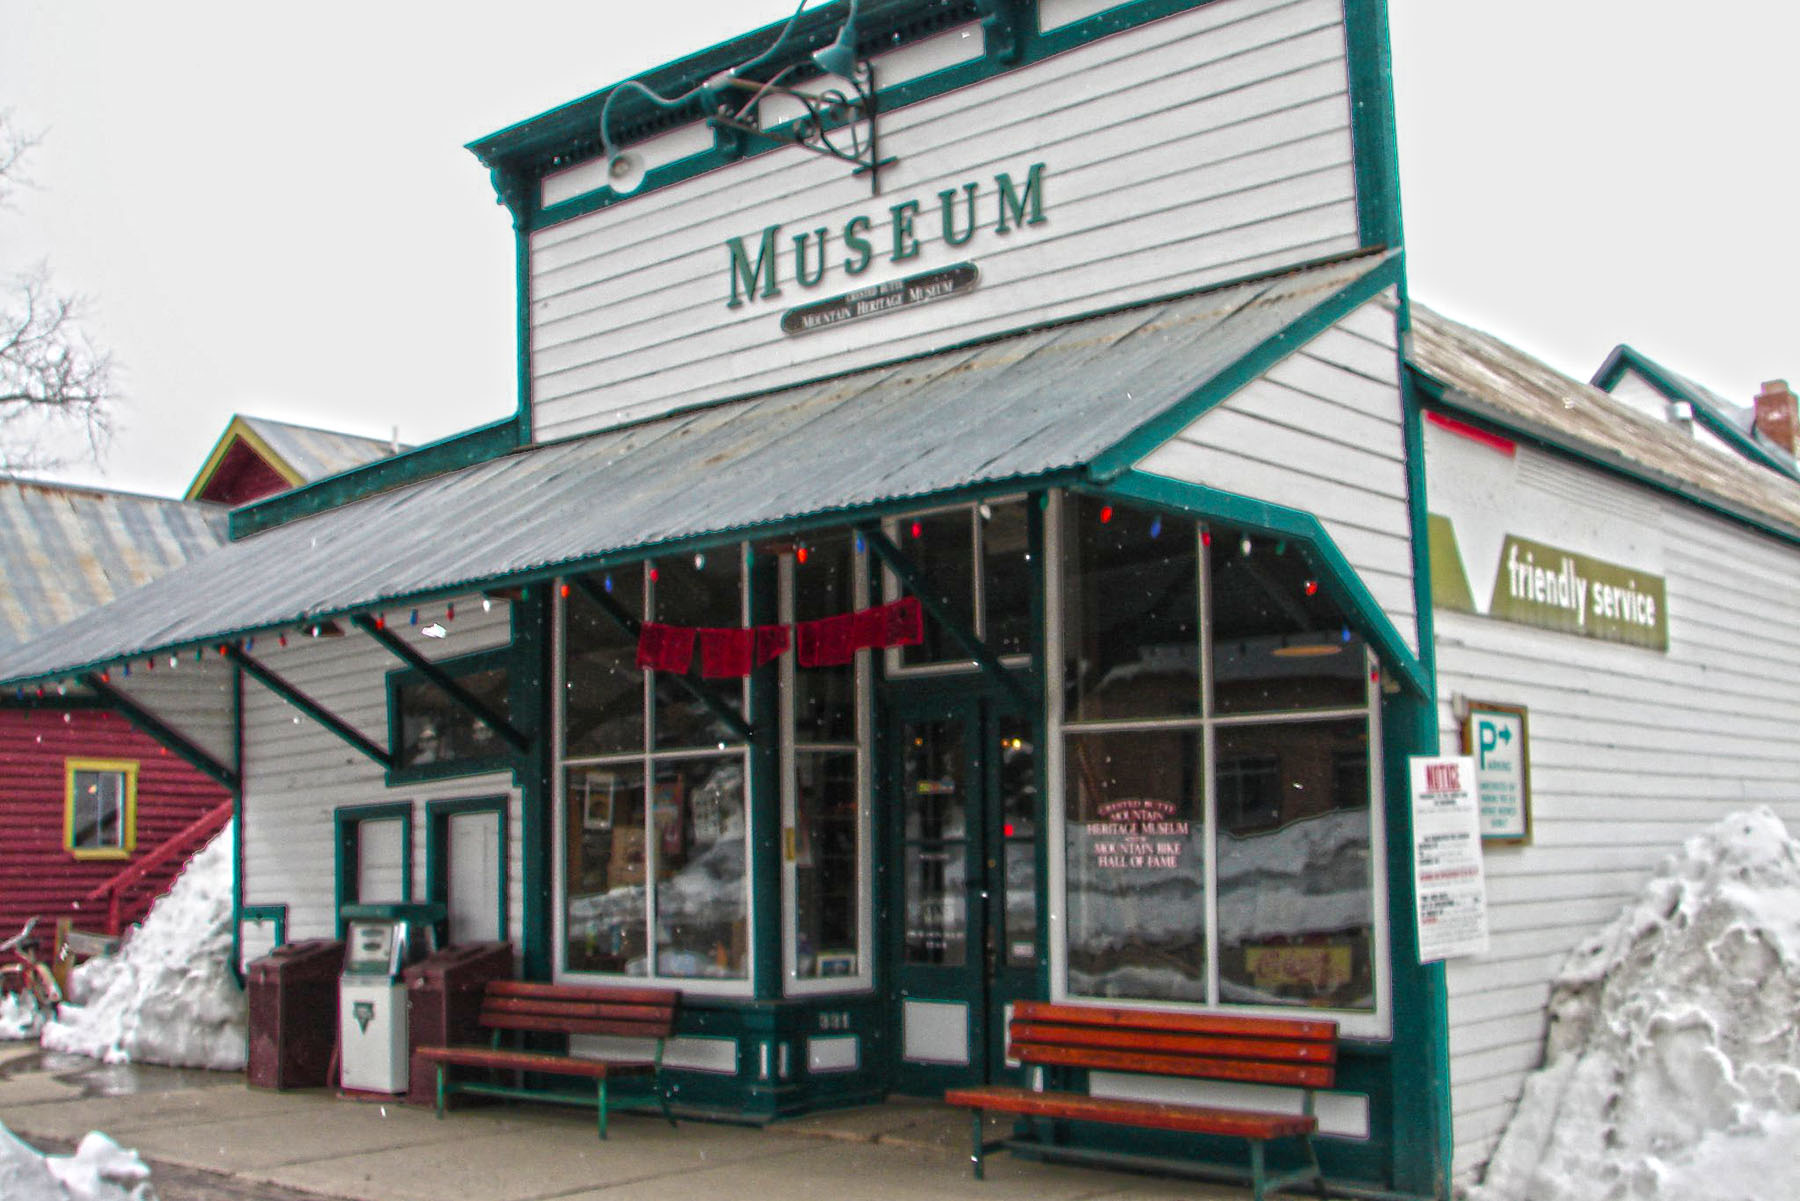 Crested Butte Museum - Crested Butte, CO